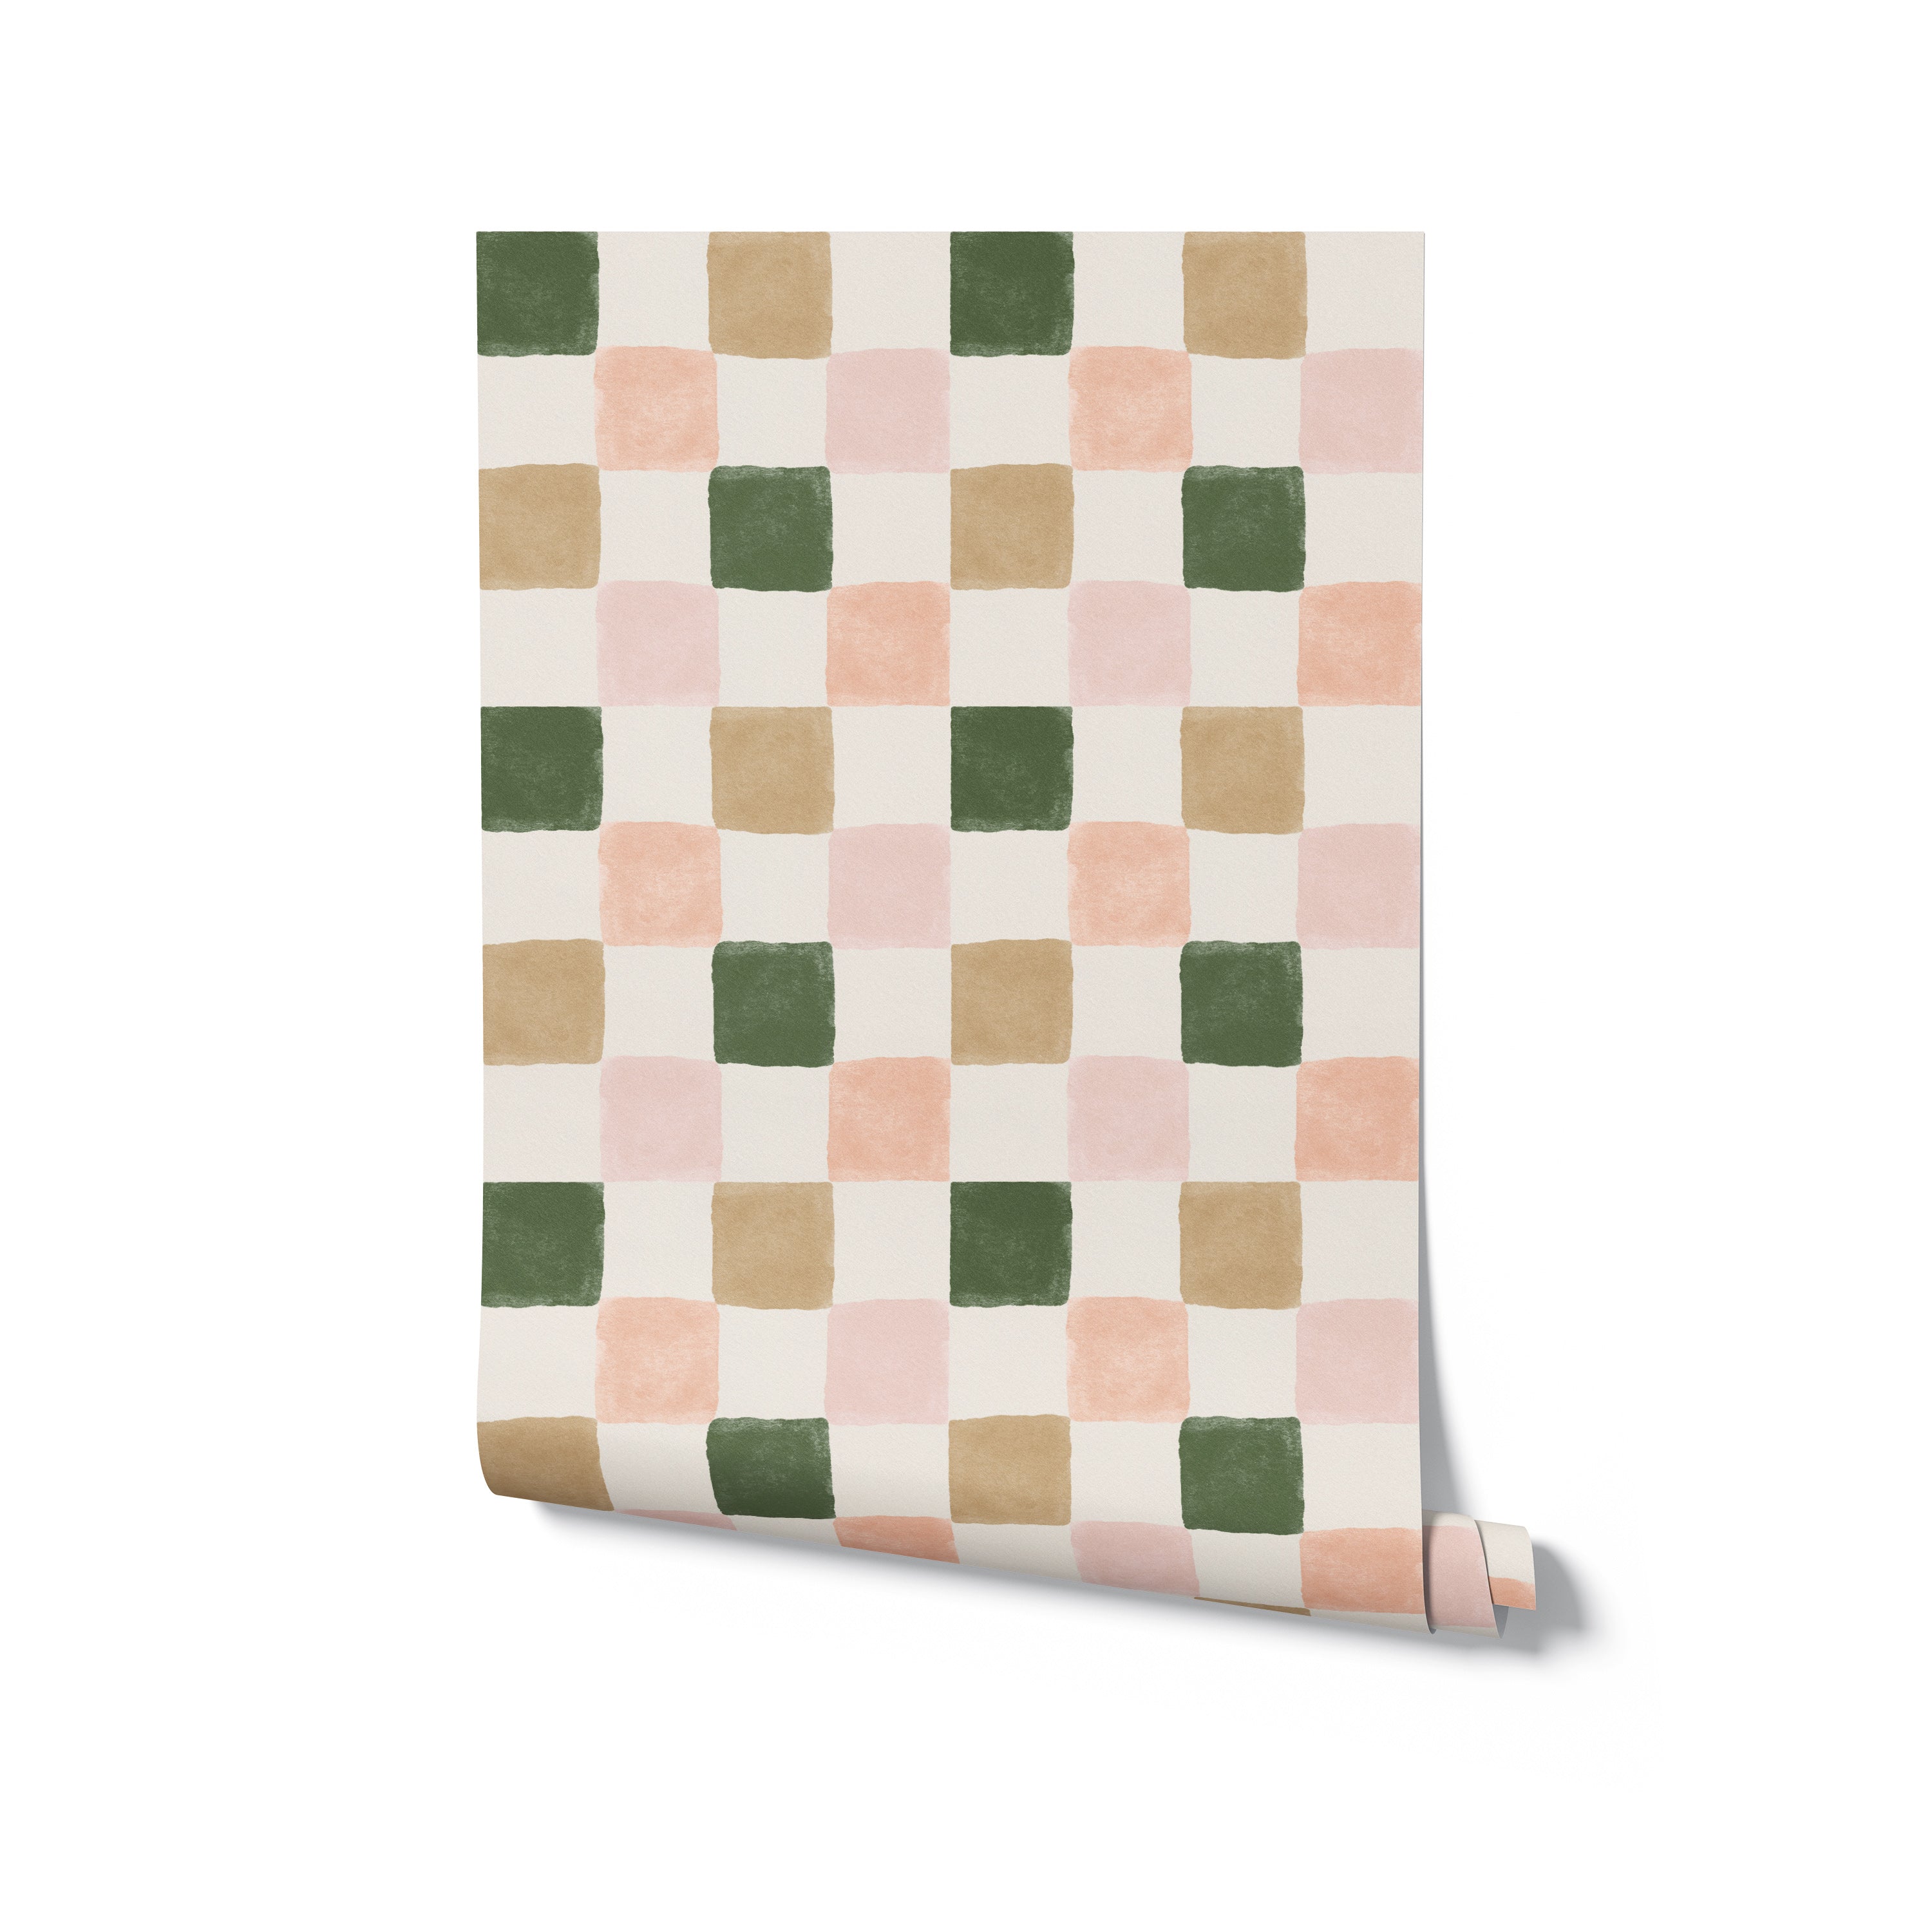 A flat lay view of a single roll of Clémence Wallpaper II. The roll showcases the checkered pattern with soft, brushed squares in green, beige, pink, and white, emphasizing the textured and vibrant design.